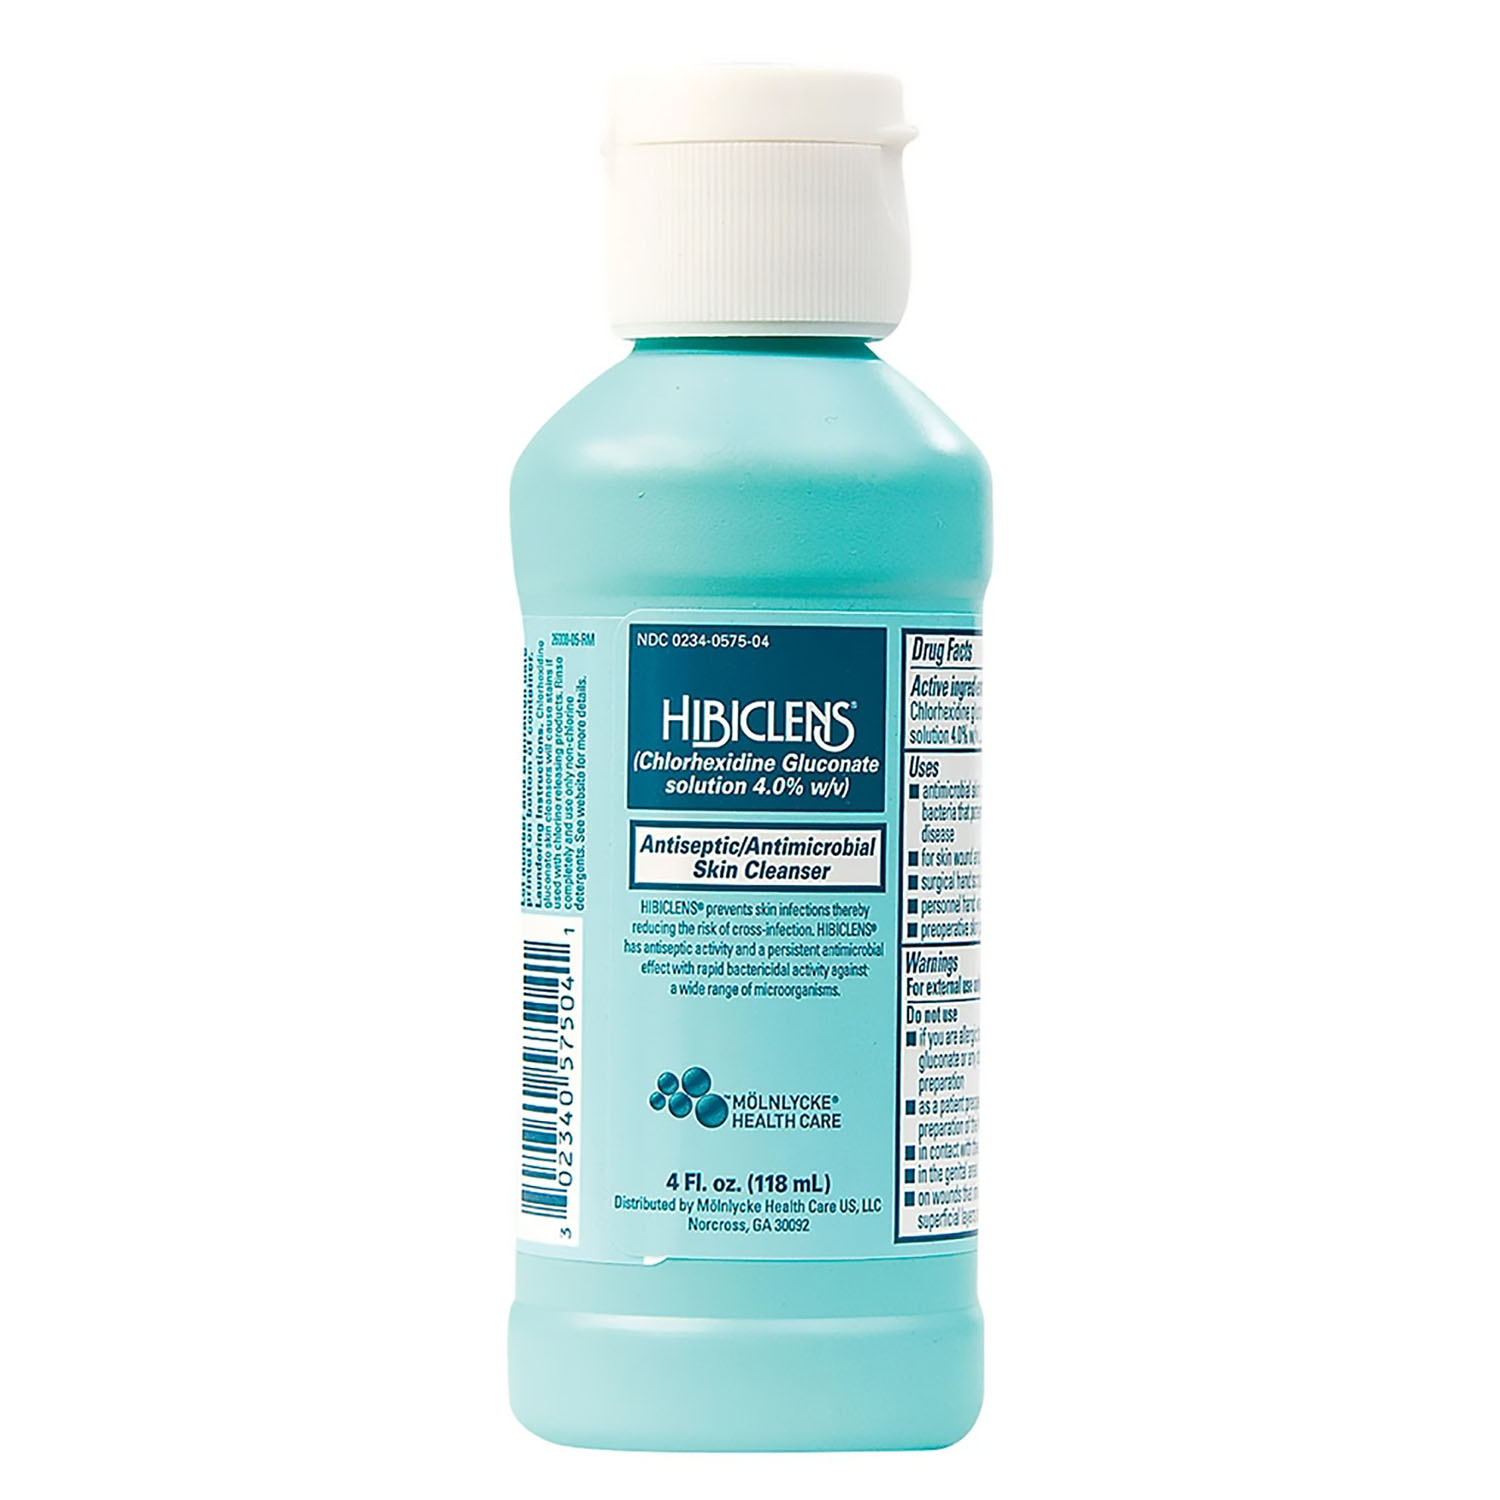 MOLNLYCKE HIBICLENS ANTISEPTIC ANTIMICROBIAL SKIN CLEANSER : 57504 EA $6.18 Stocked